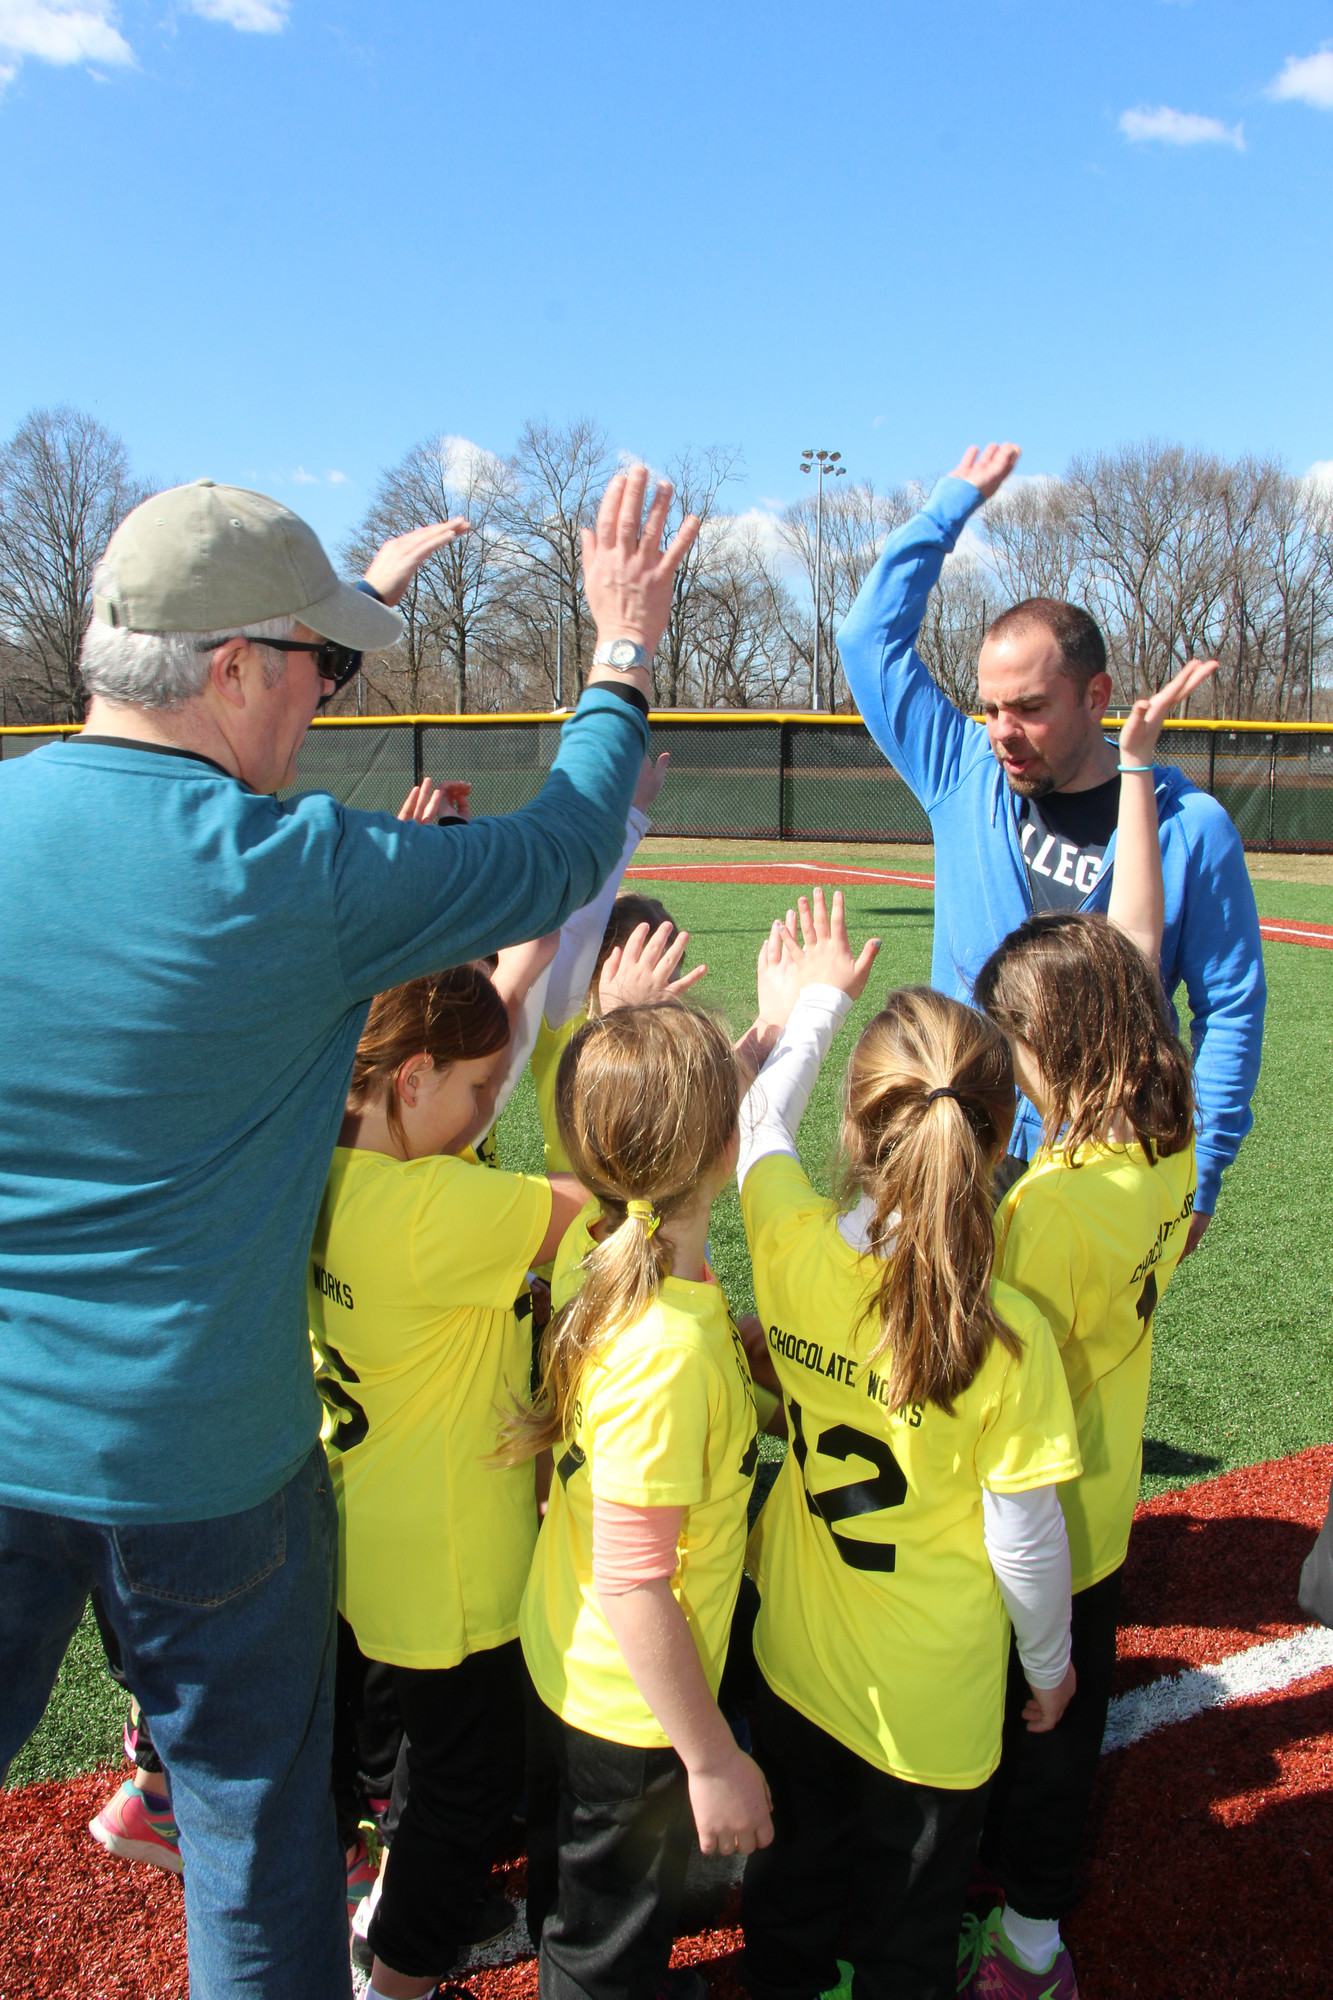 Coaches Brian Koluch, left, and Bob Bee got the Bumble Bees ready for their first game of the season.